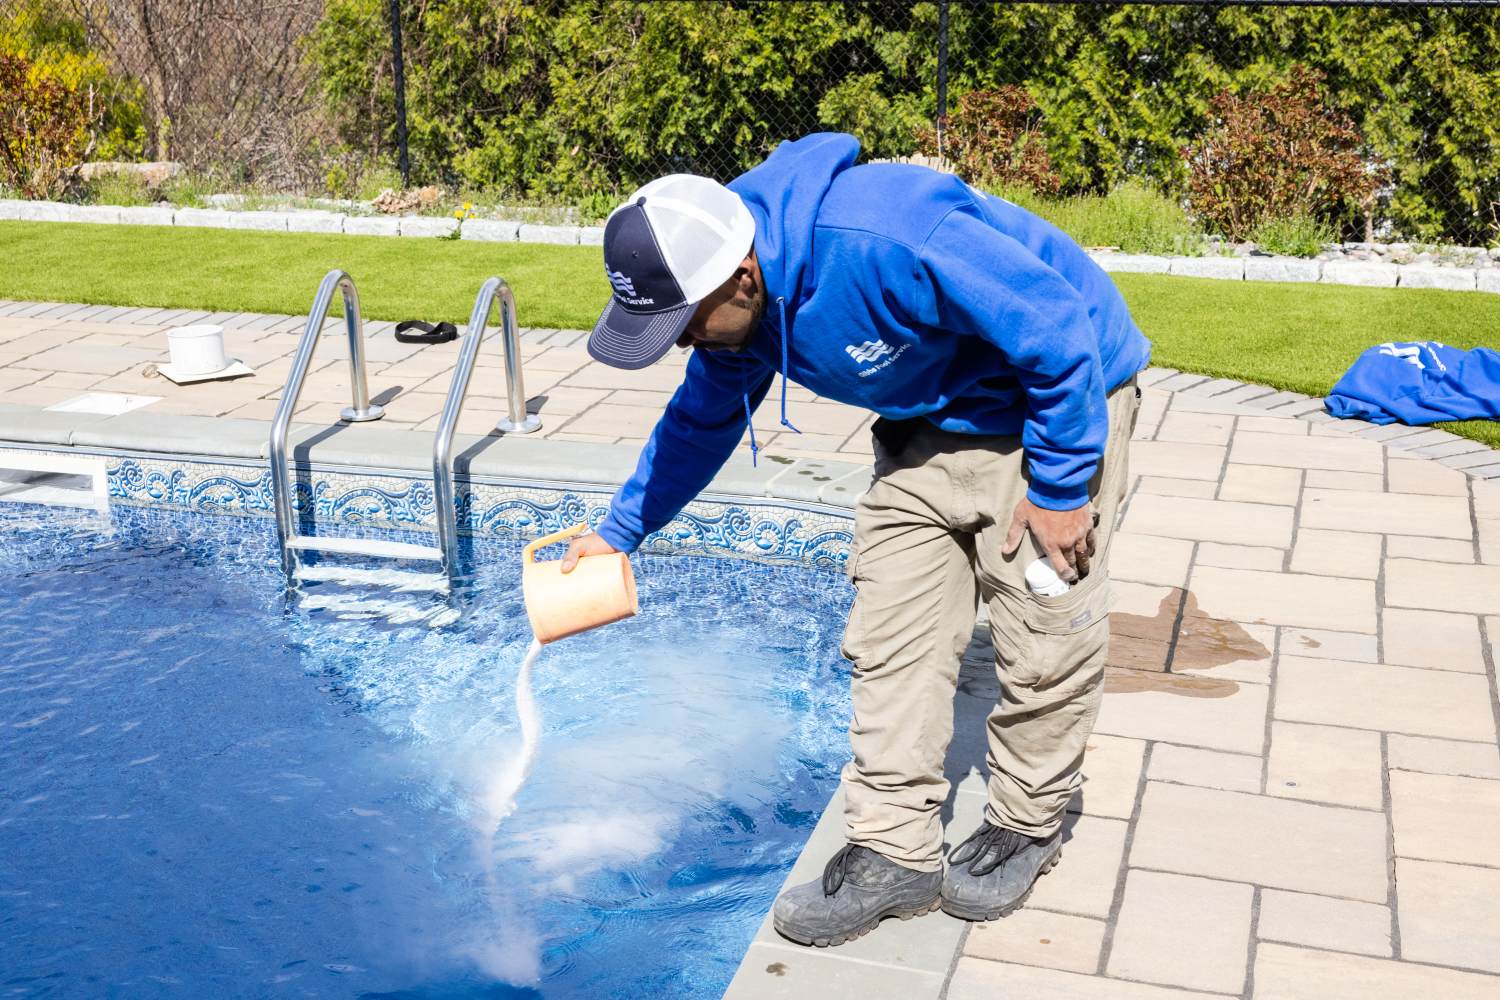 A man in blue jacket cleaning pool with spray.